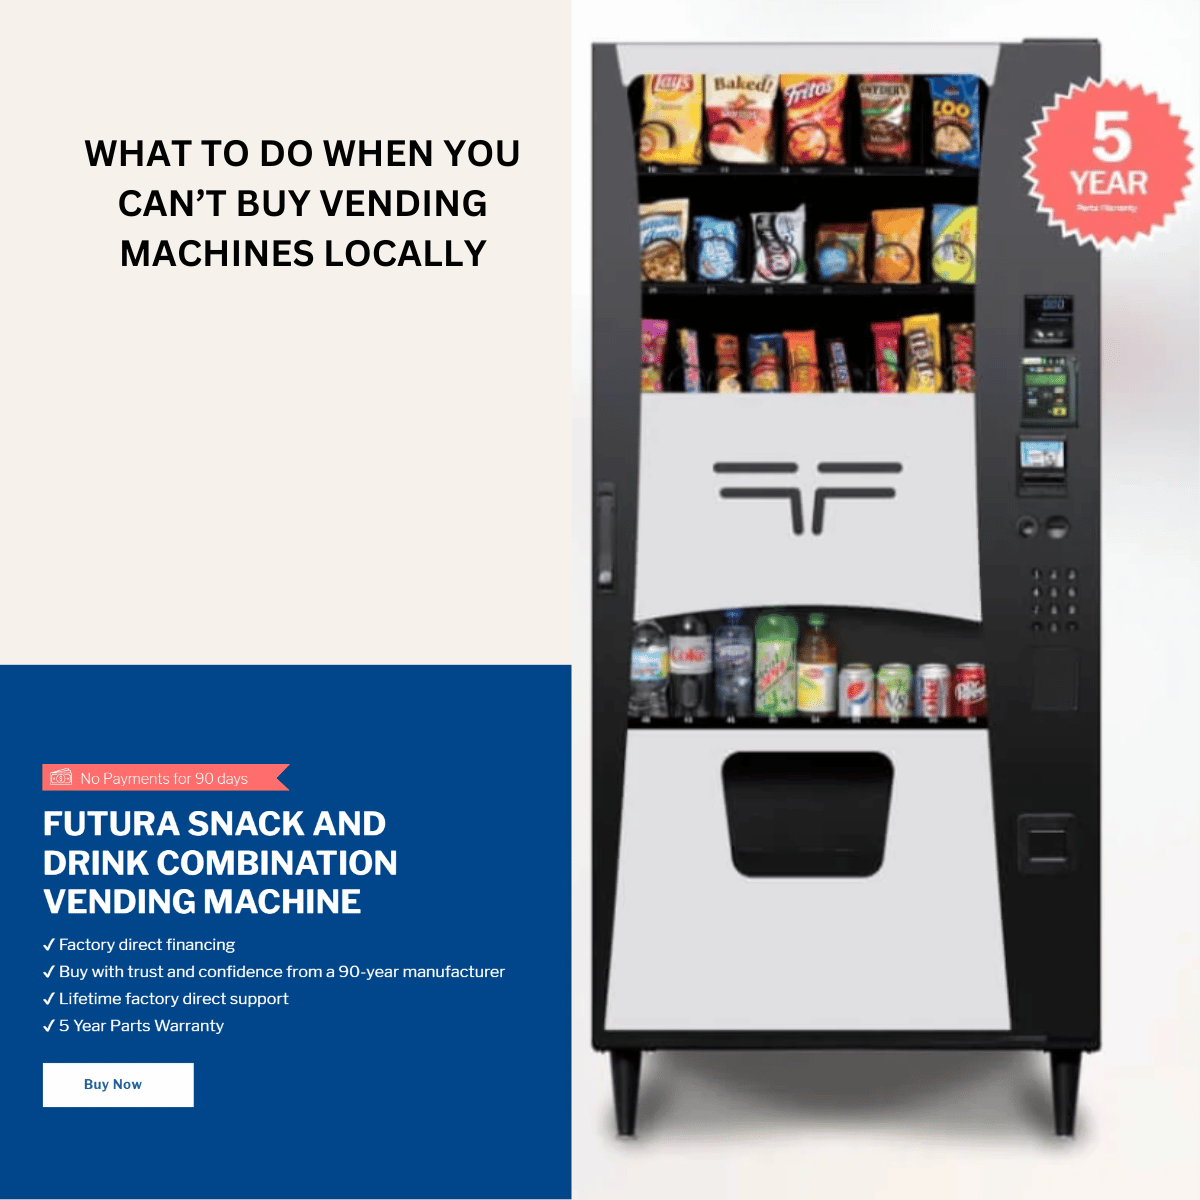 WHAT TO DO WHEN YOU CAN’T BUY VENDING MACHINES LOCALLY